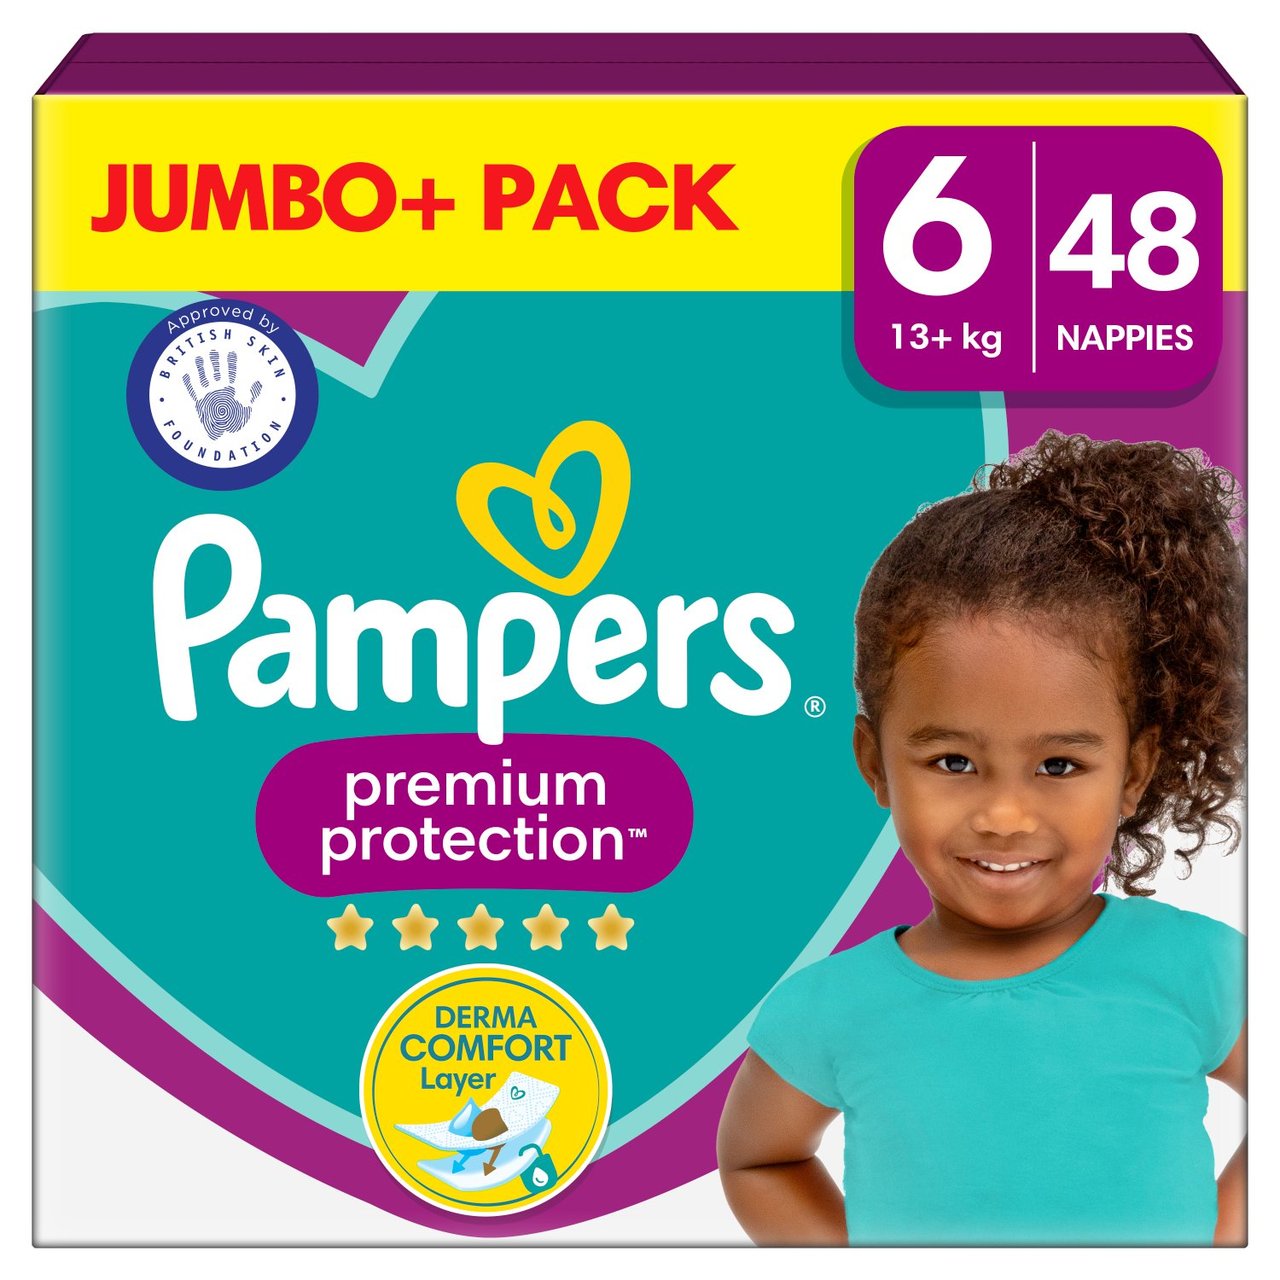 pampers naty